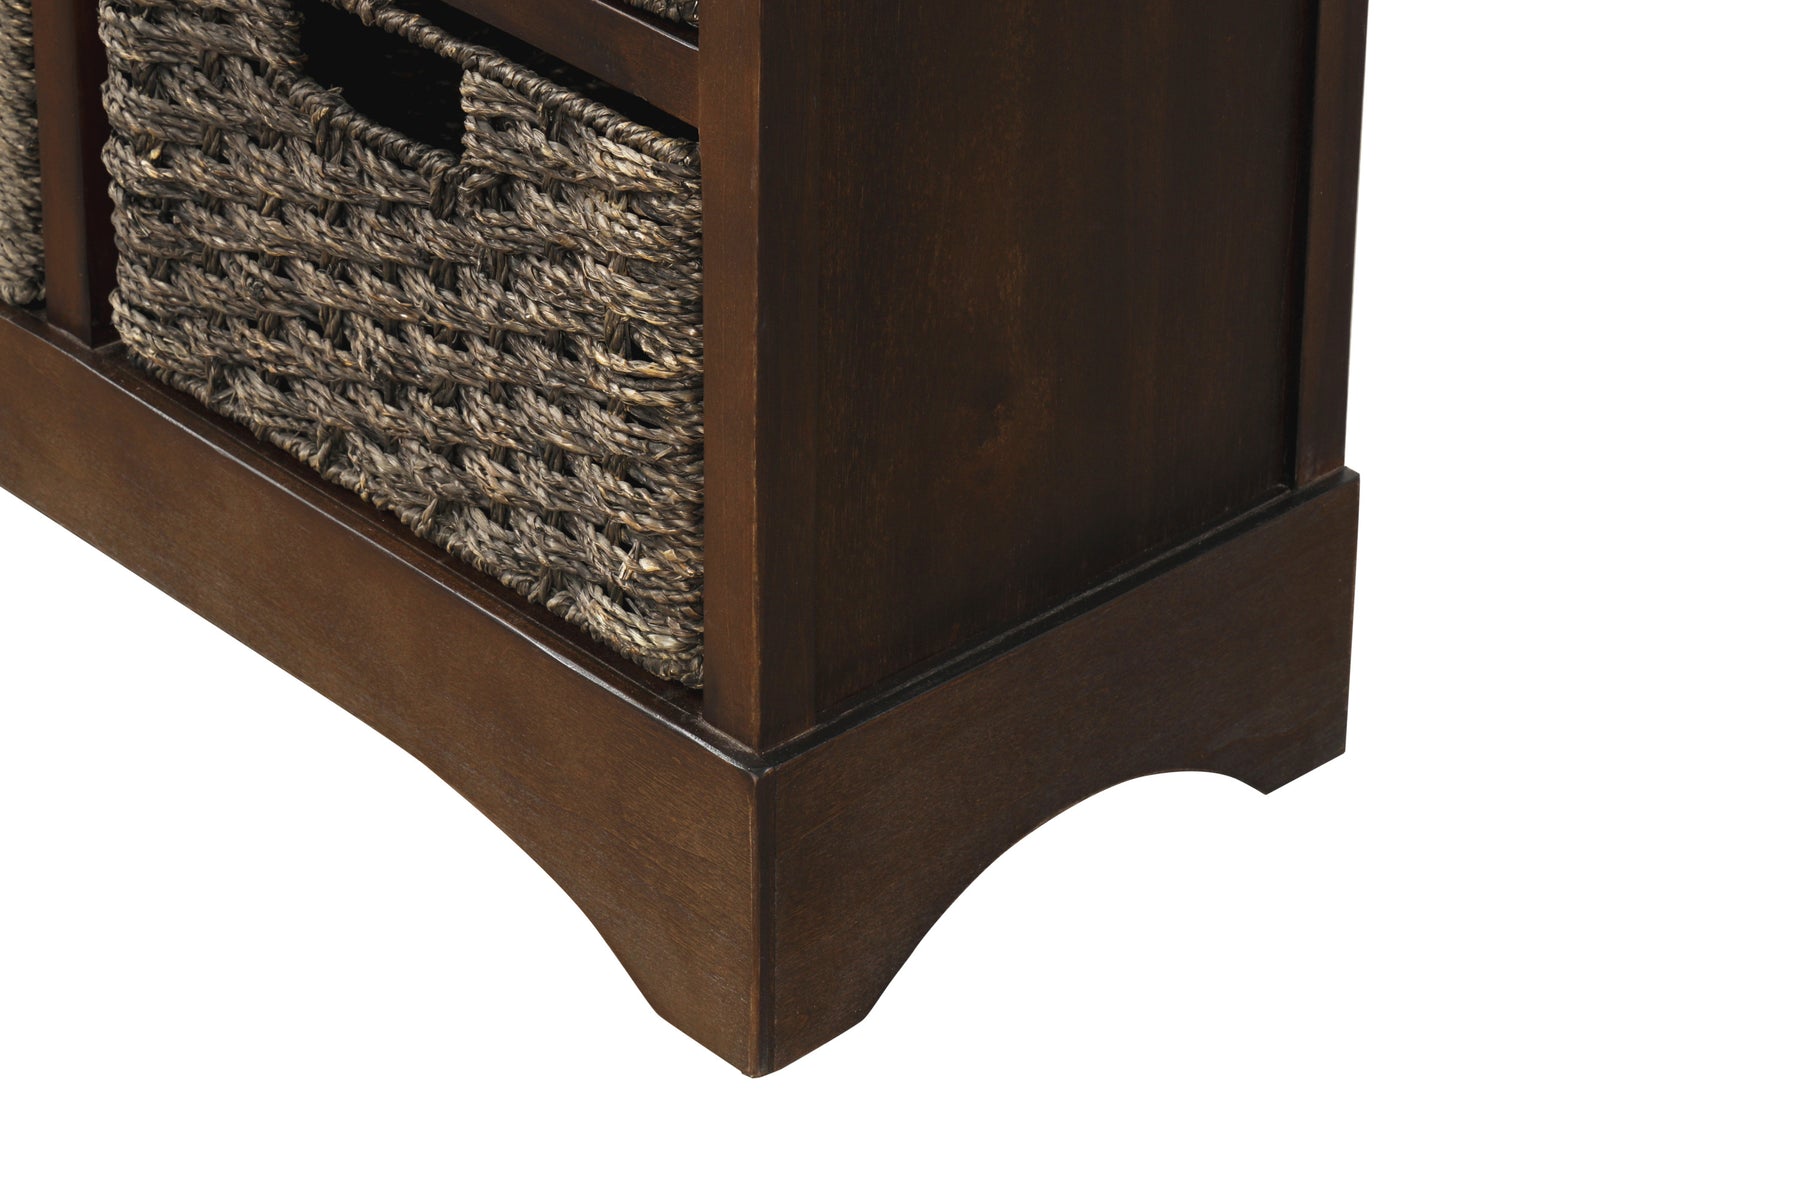 TREXM Rustic Storage Cabinet with Two Drawers and Four Classic Rattan Basket for Dining Room/Living Room (Espresso) - Tonkn